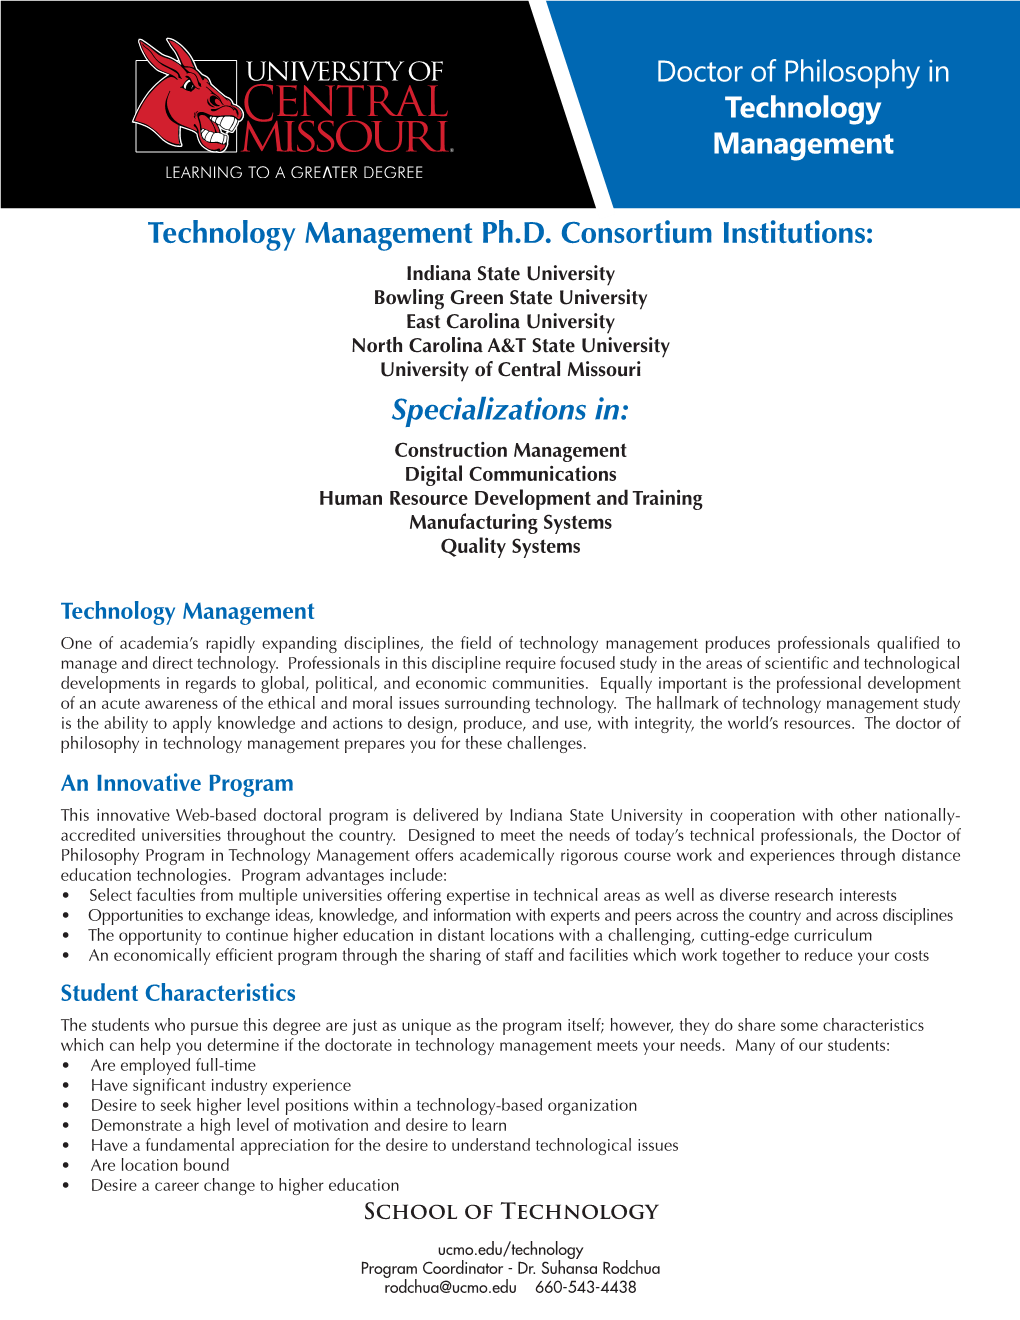 Doctor of Philosophy in Technology Management